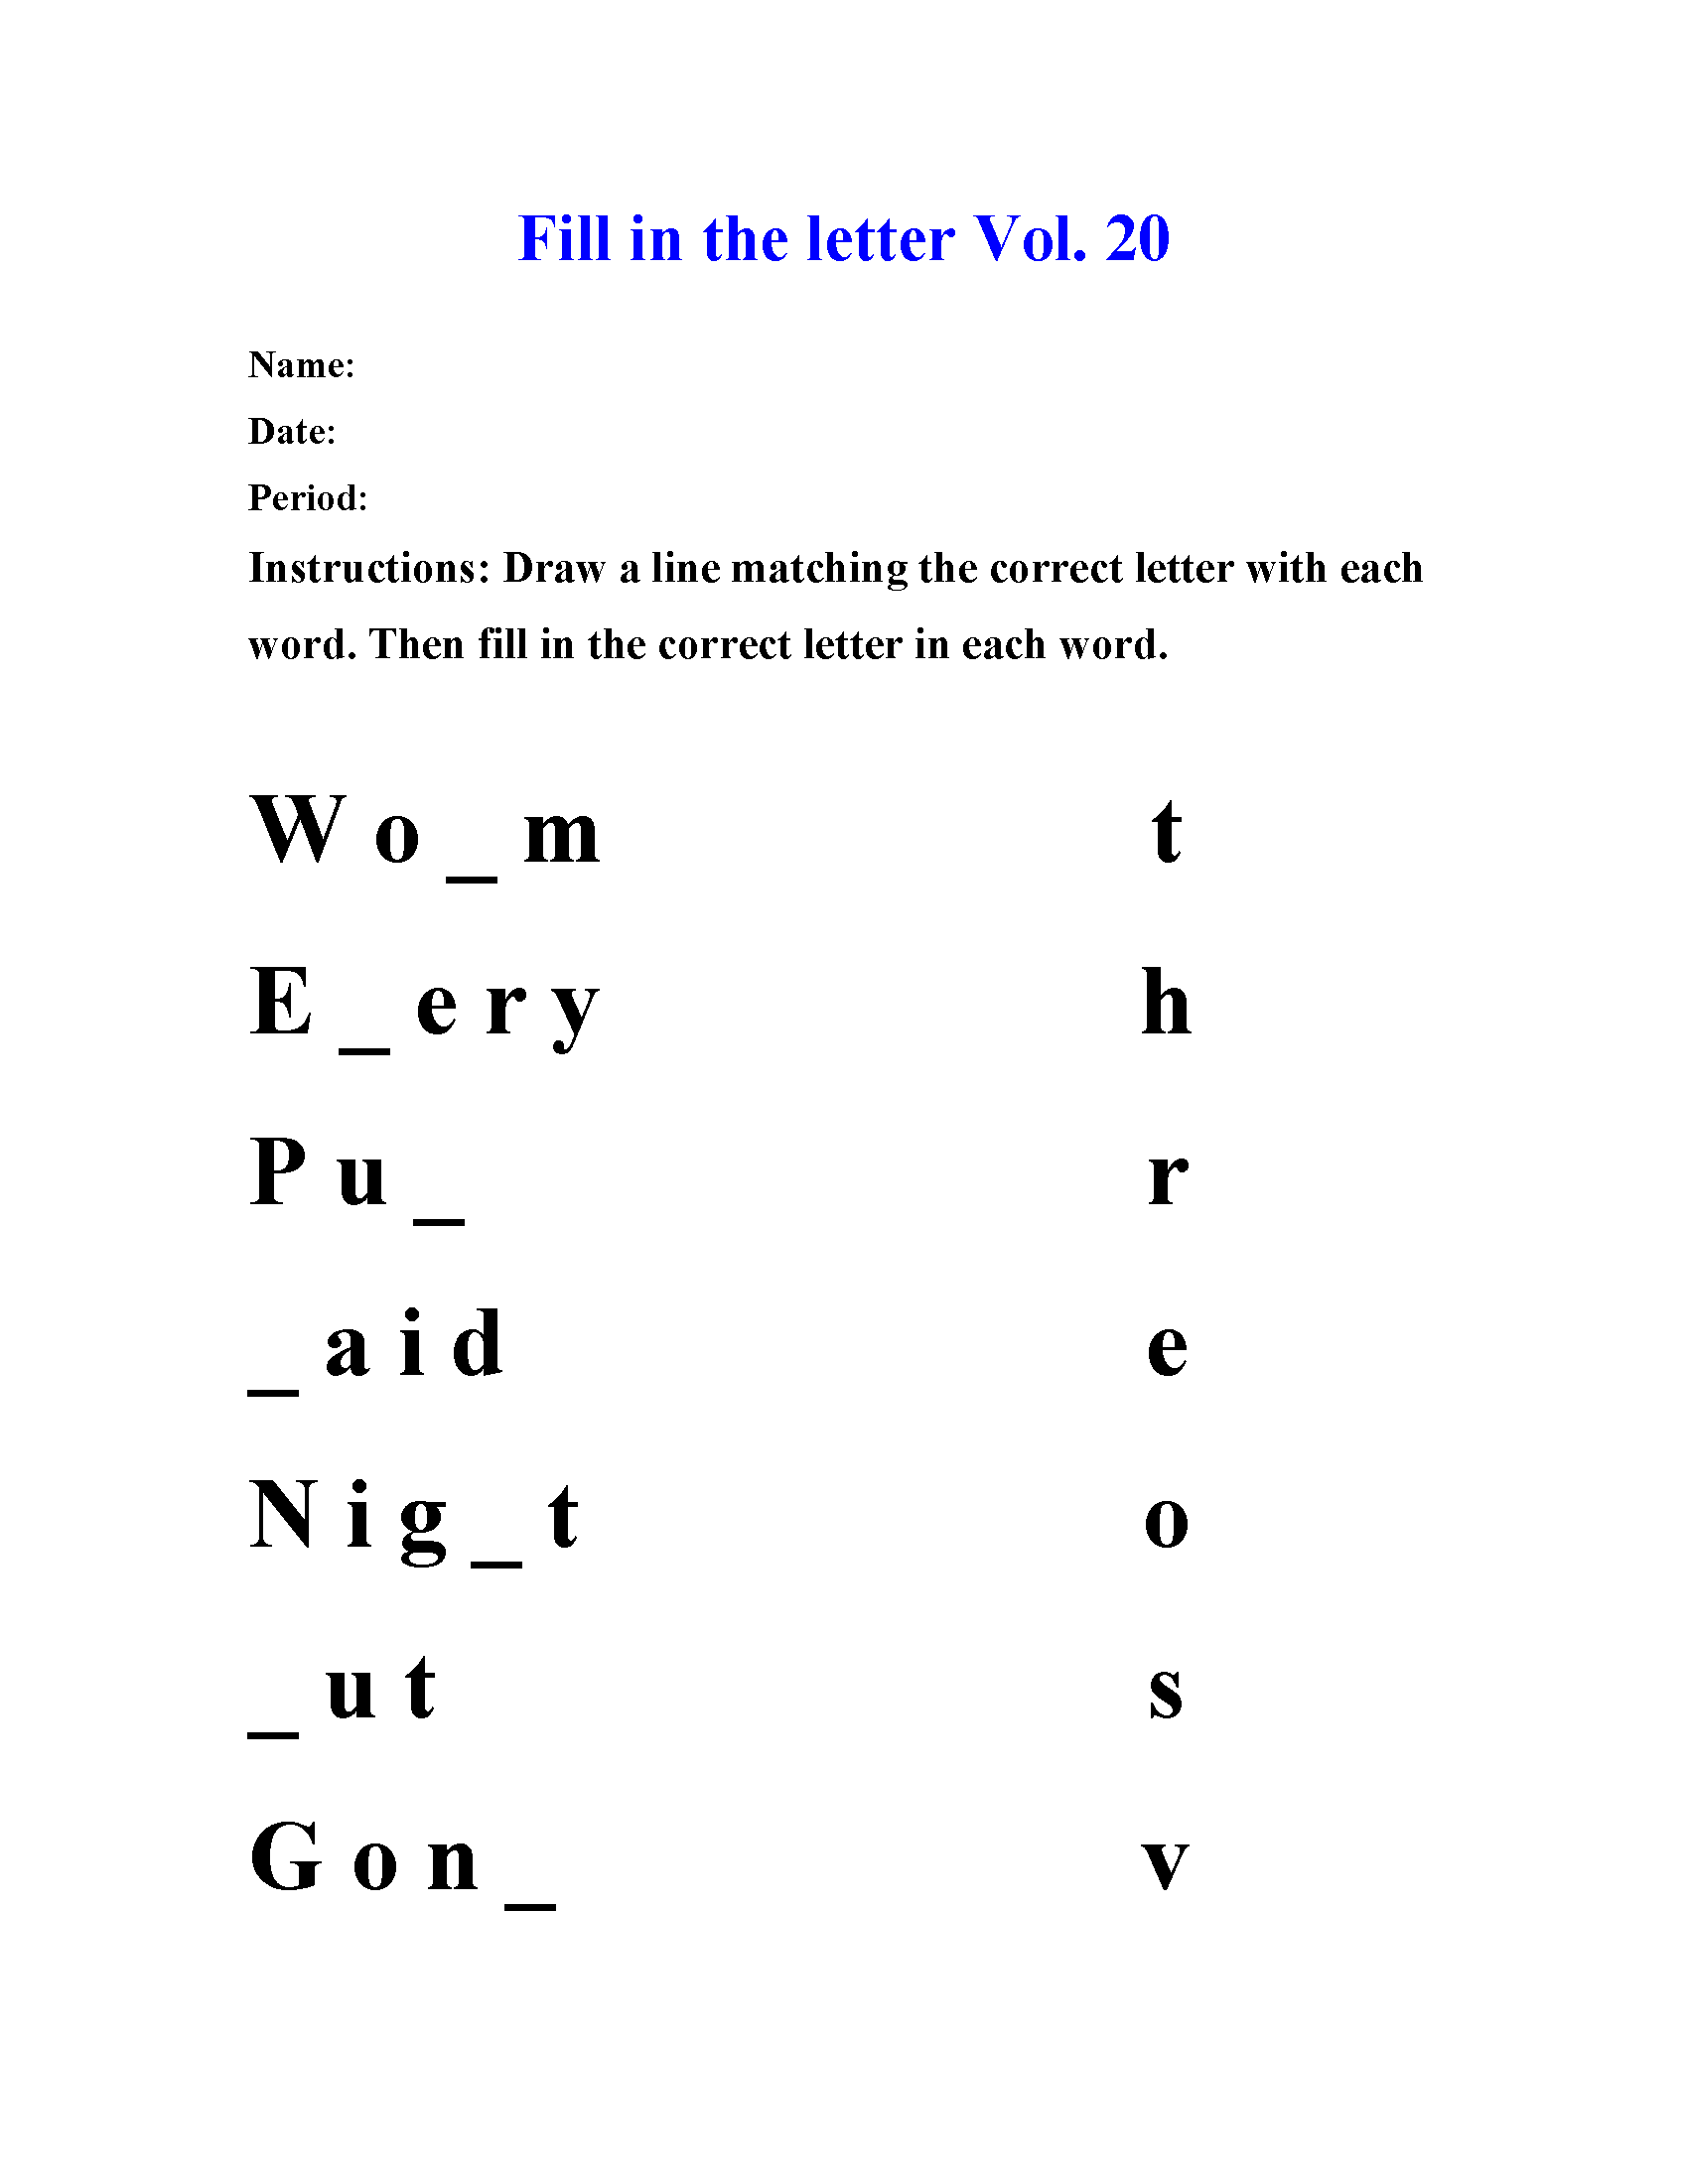 Fill in the letter Vol 20